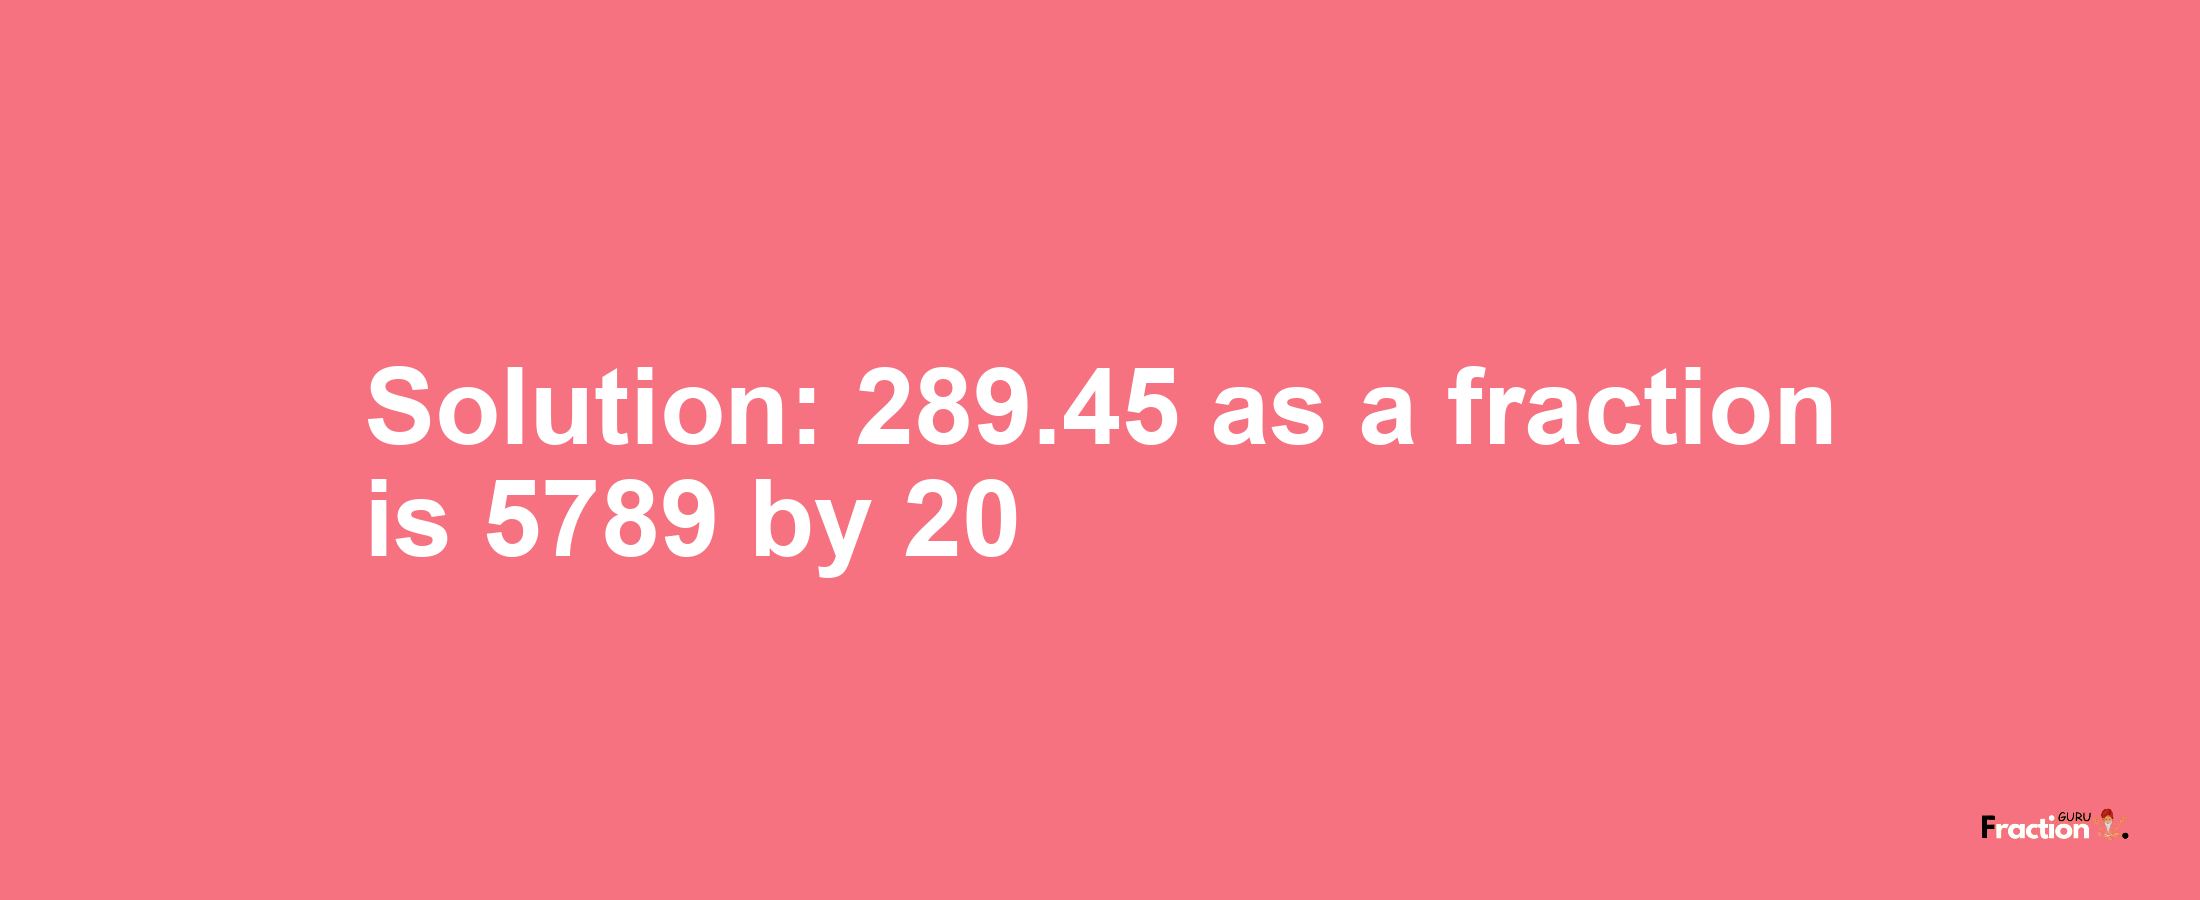 Solution:289.45 as a fraction is 5789/20